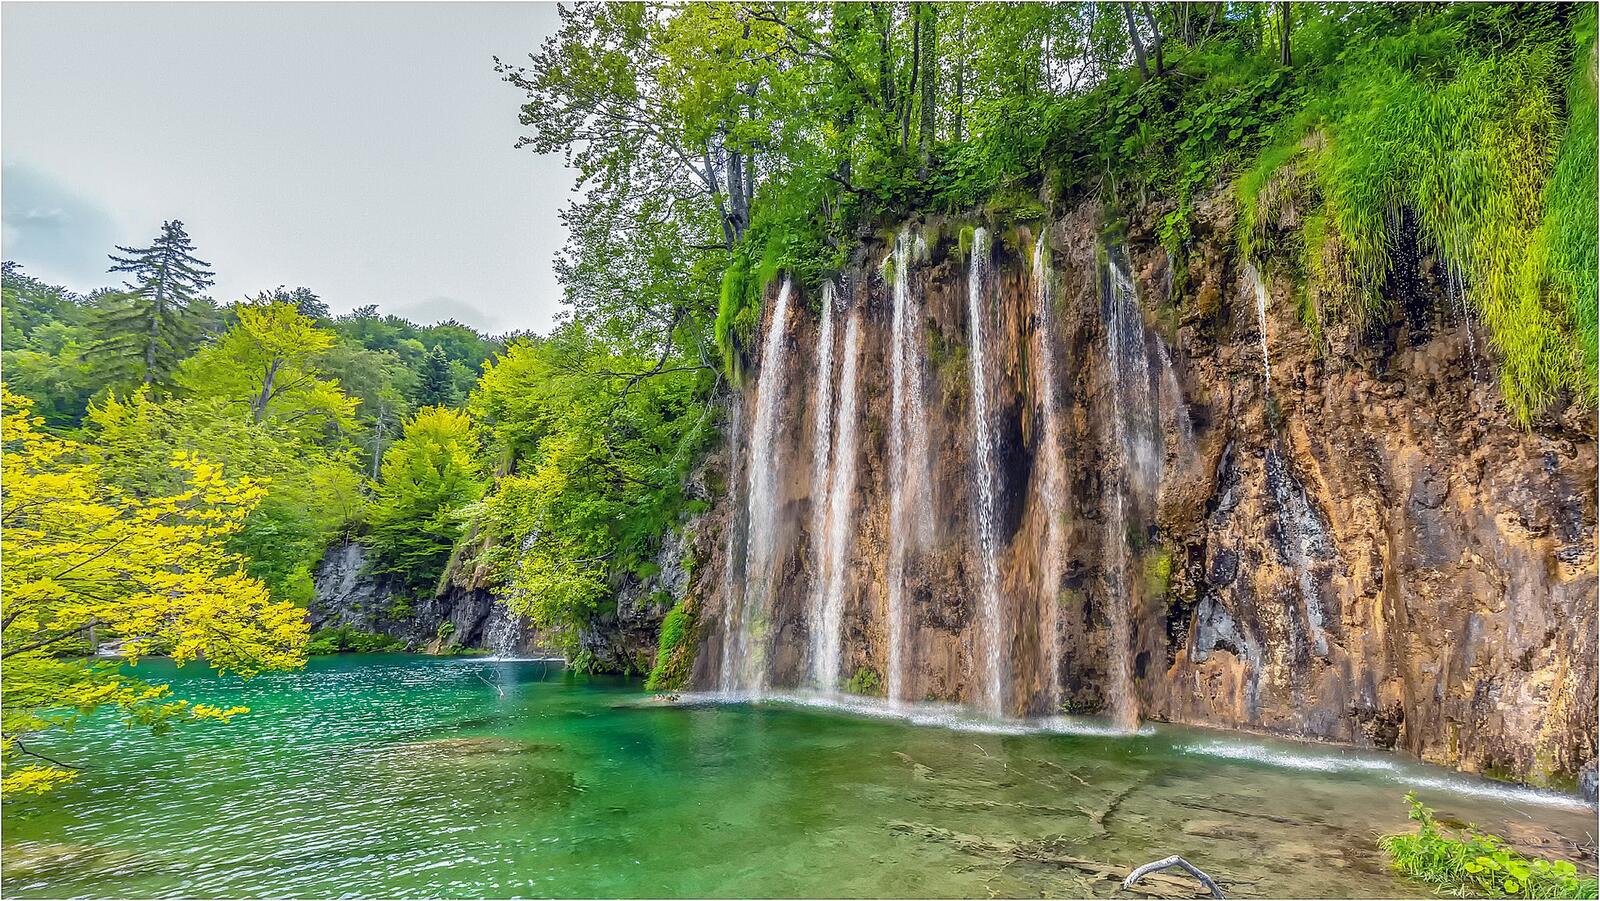 Wallpapers river trees Plitvice Lakes National Park on the desktop